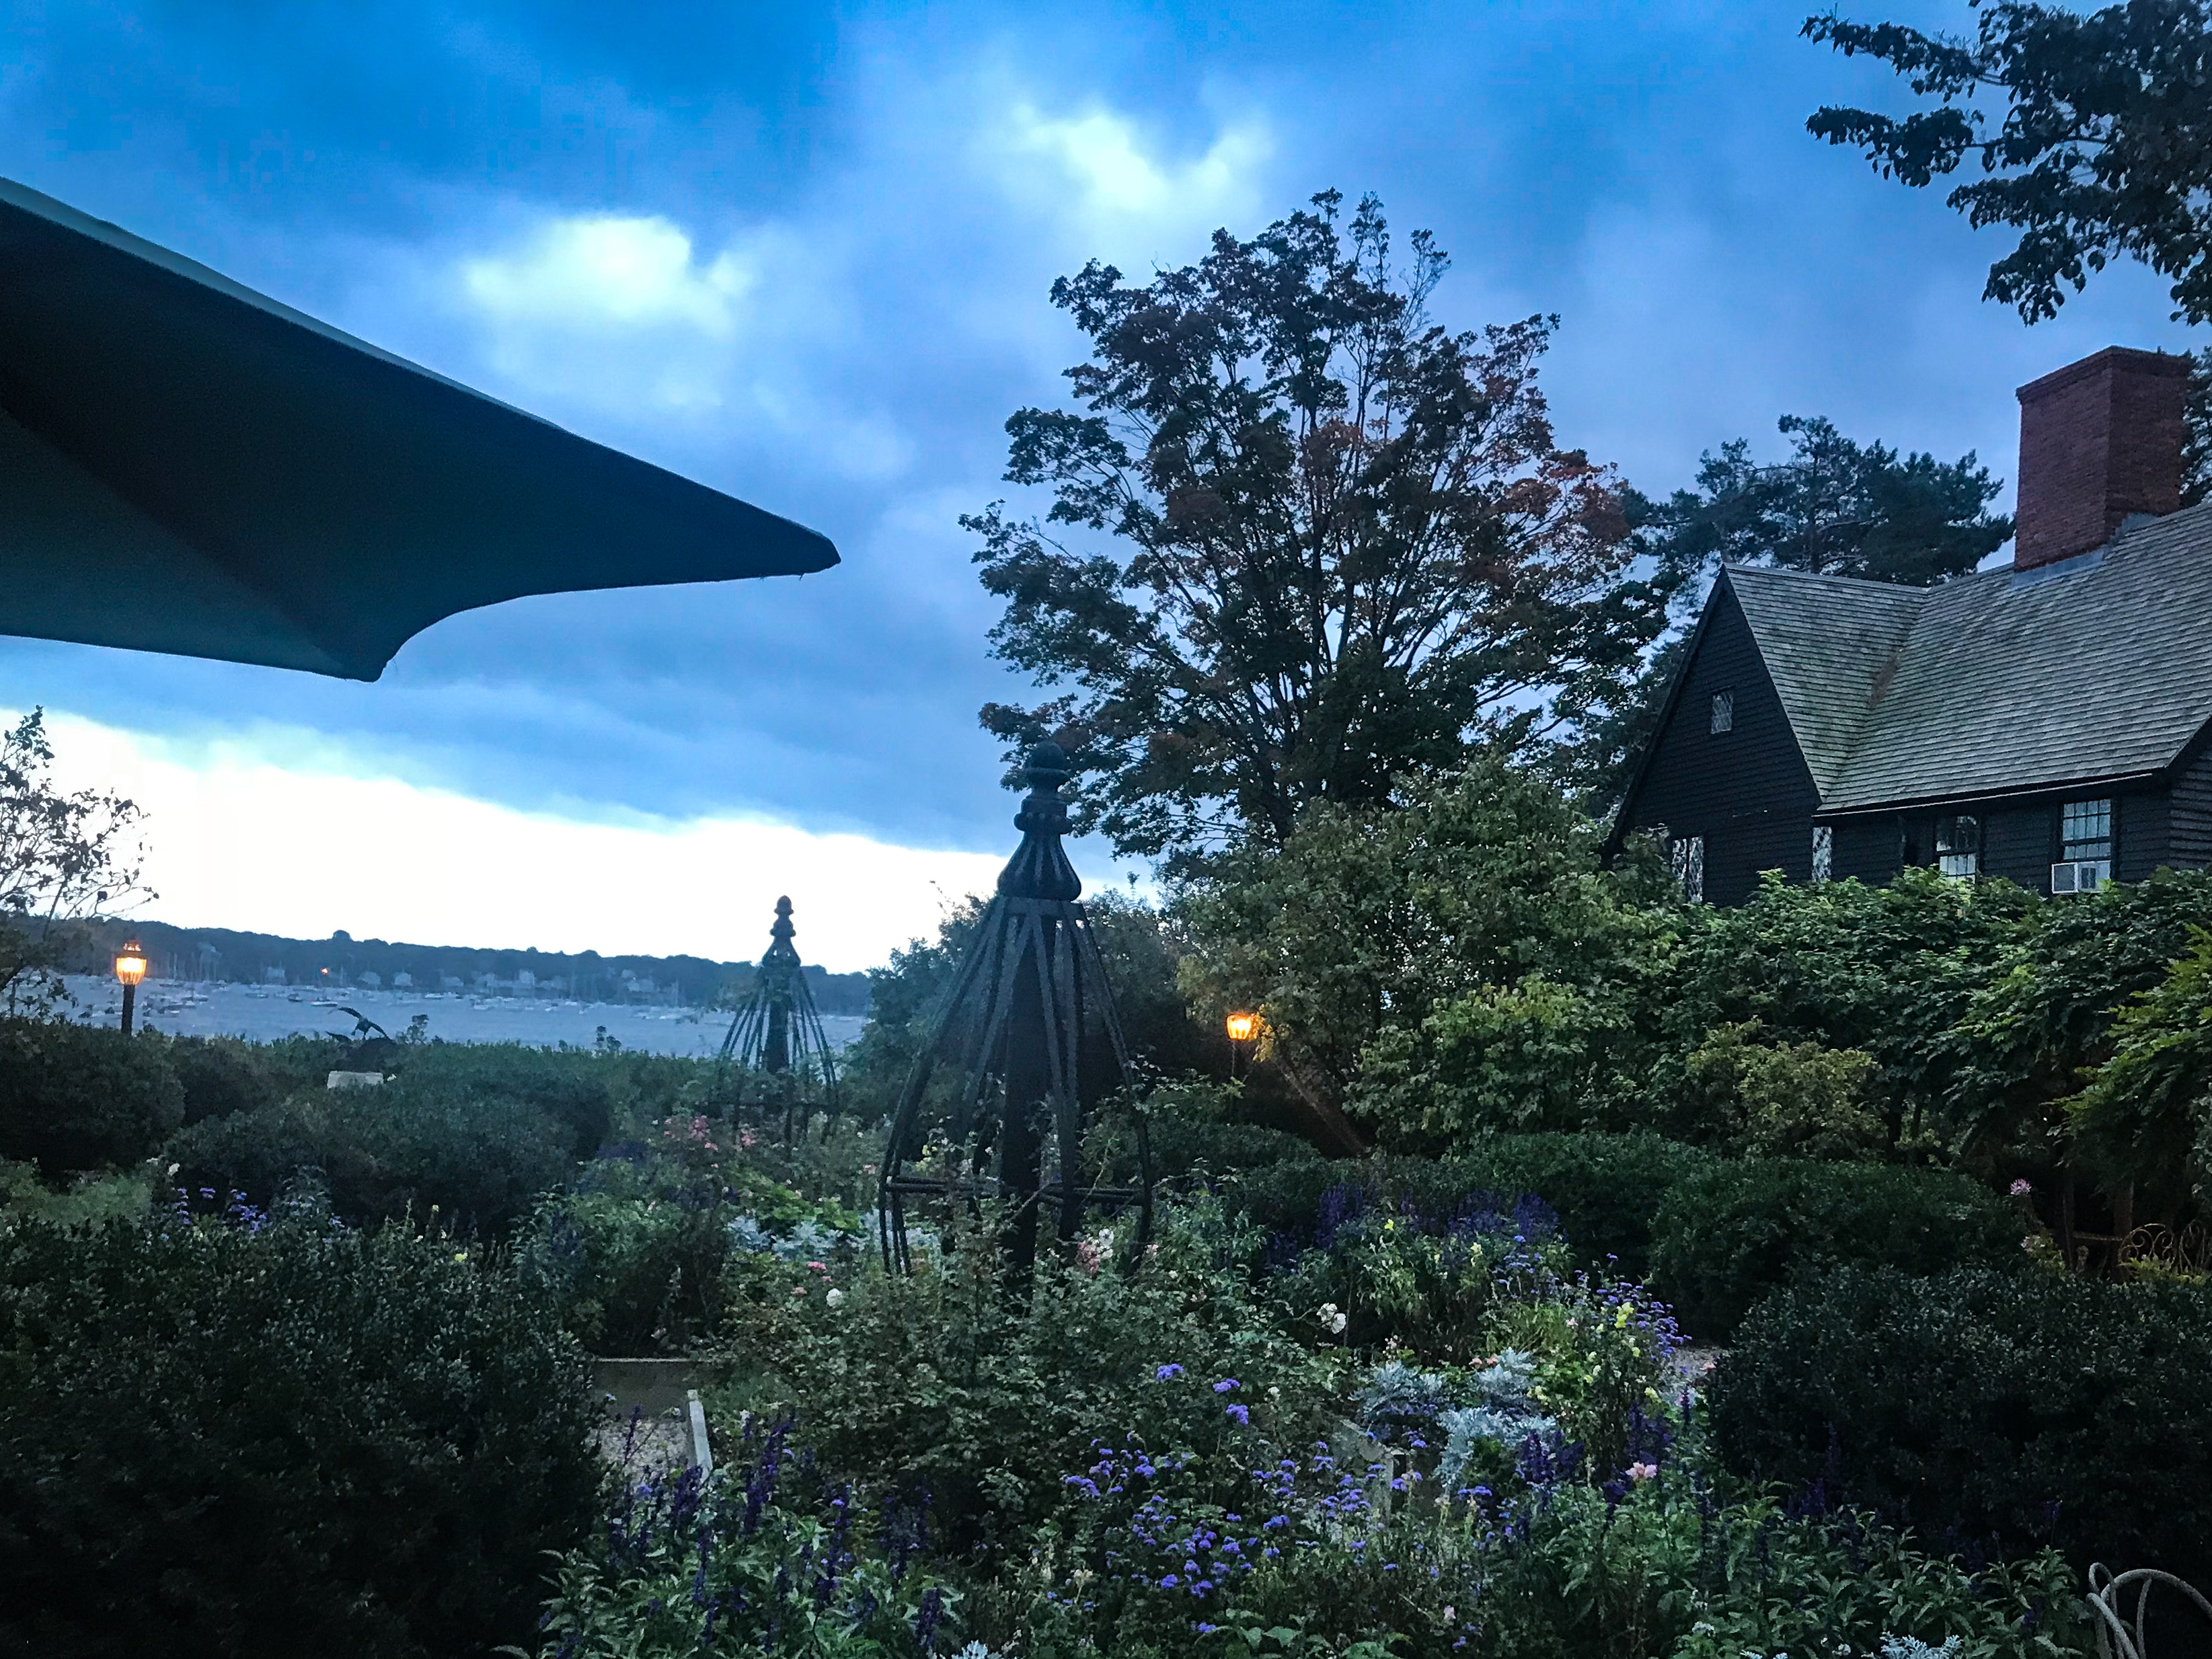 The House of Seven Gables offers unprecedented views of Salem Harbor paired with history.